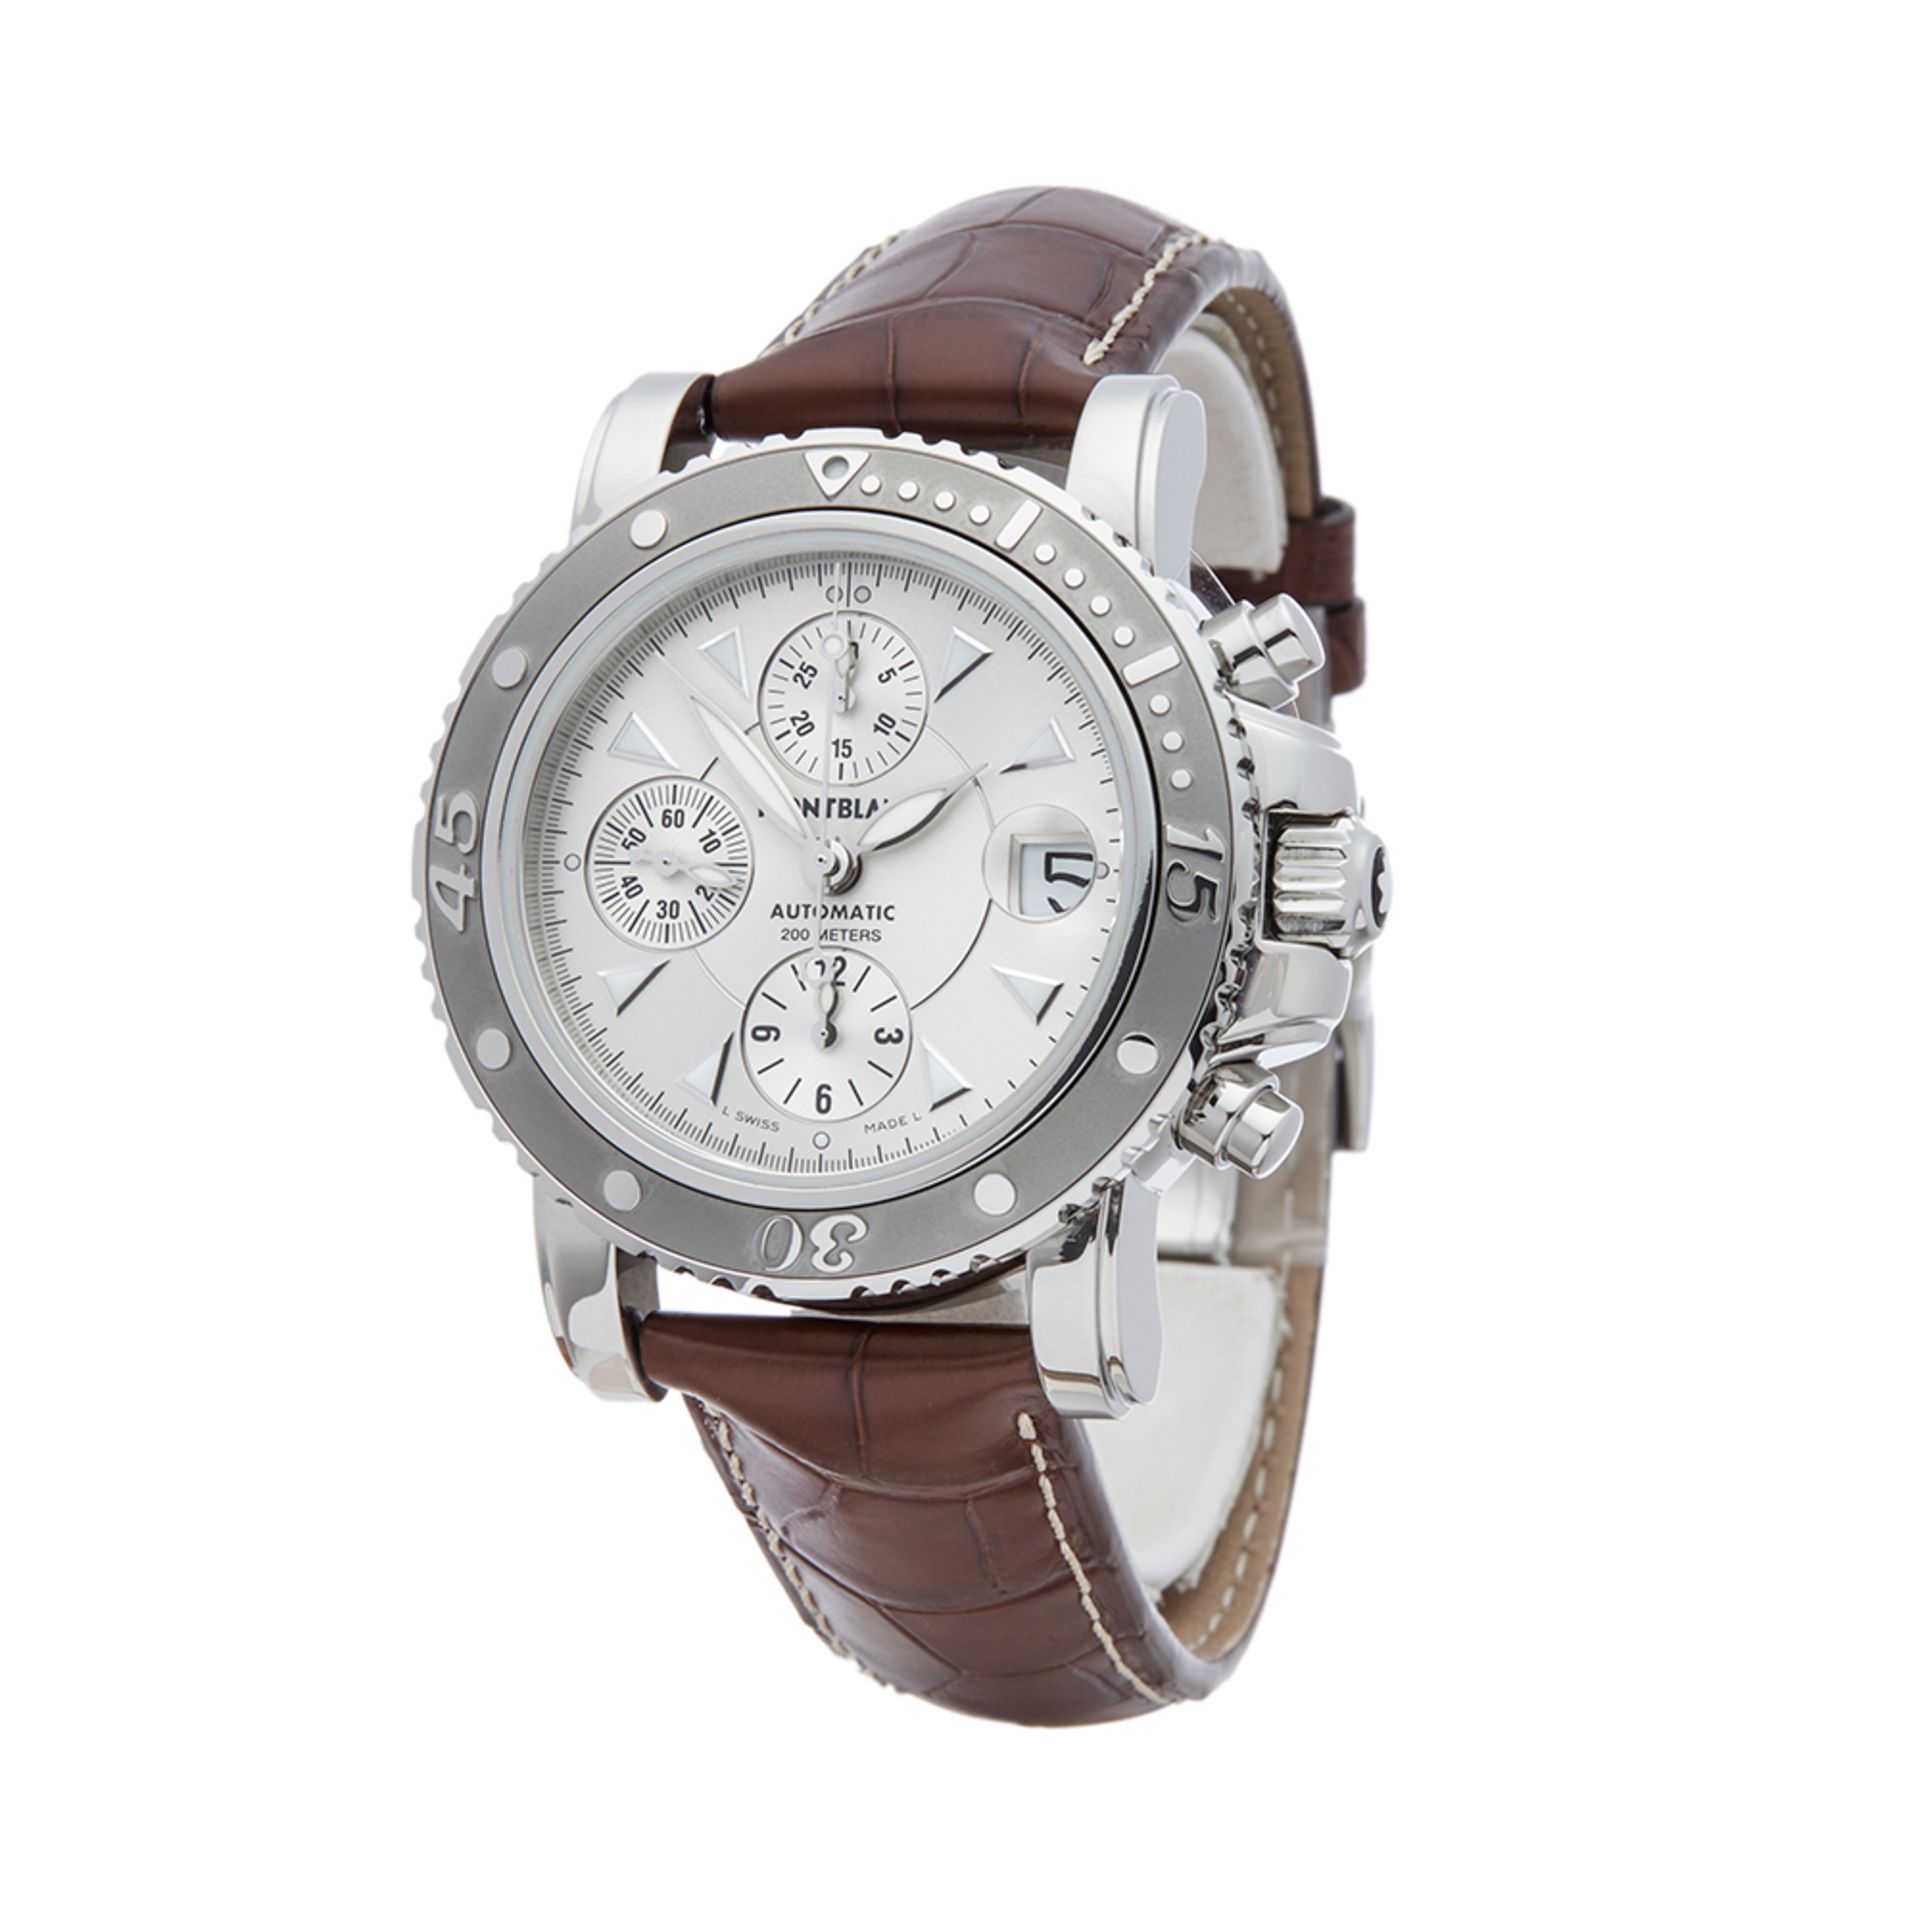 Montblanc Sport Chronograph 41mm Stainless Steel - 35777 - Image 3 of 8